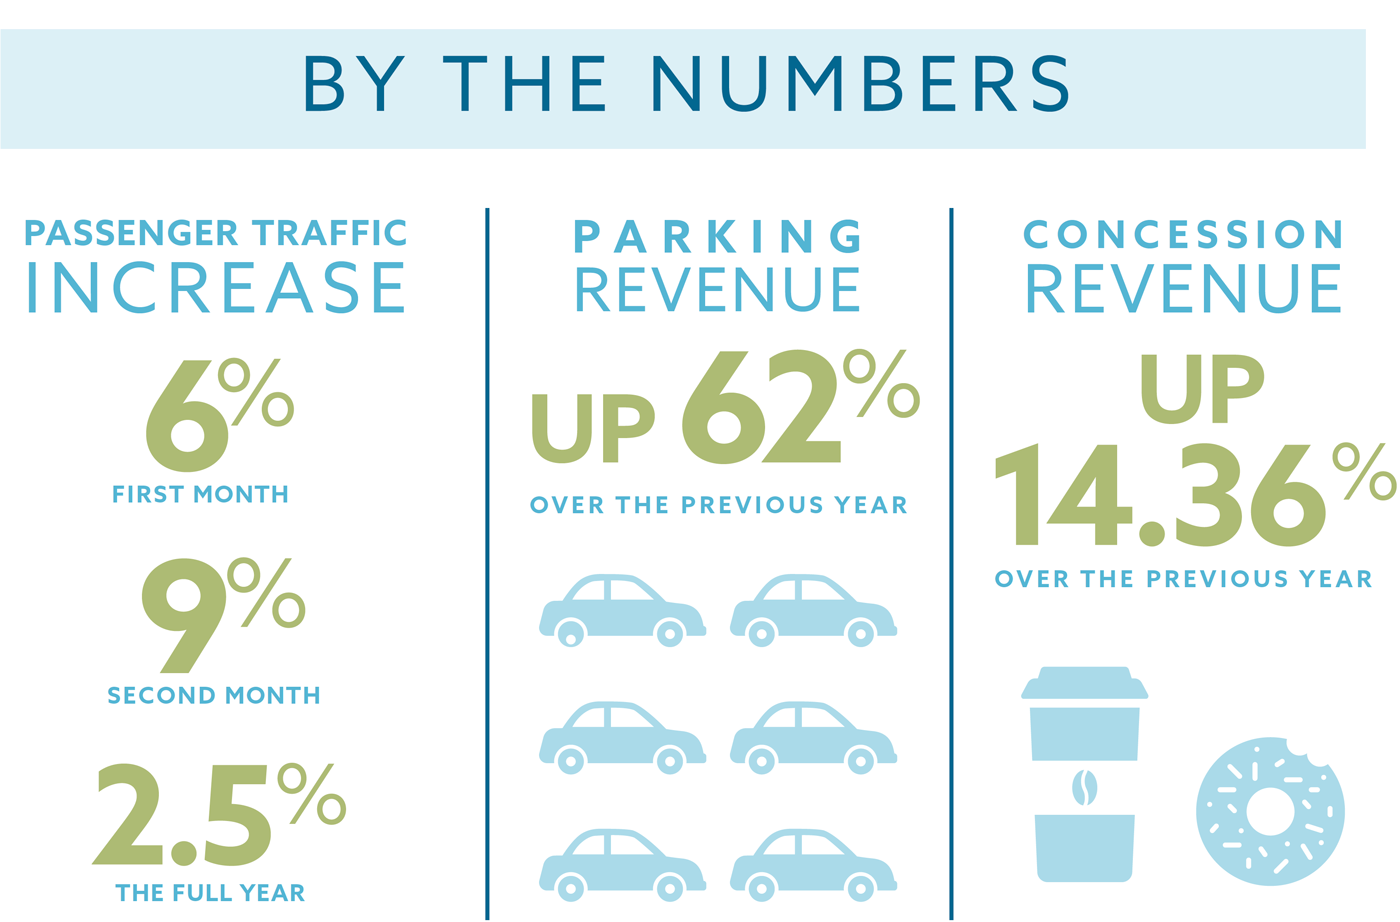 Passengers, Parking, Concession- Wichita Airport Infographic